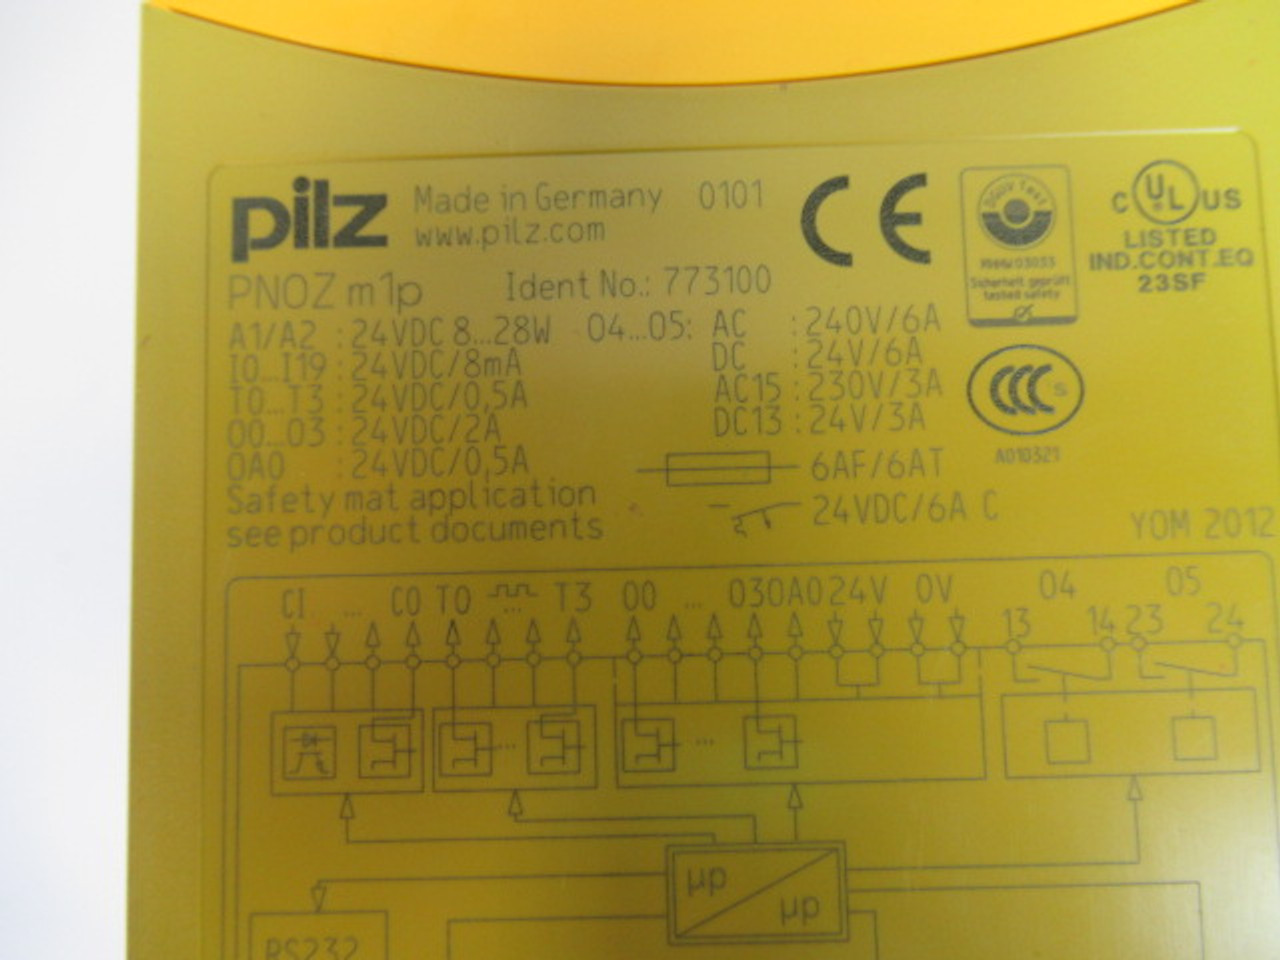 Pilz PNOZ-m1p 773100 Configurable Safe Small Controller 20-Inputs 24VDC 6A USED